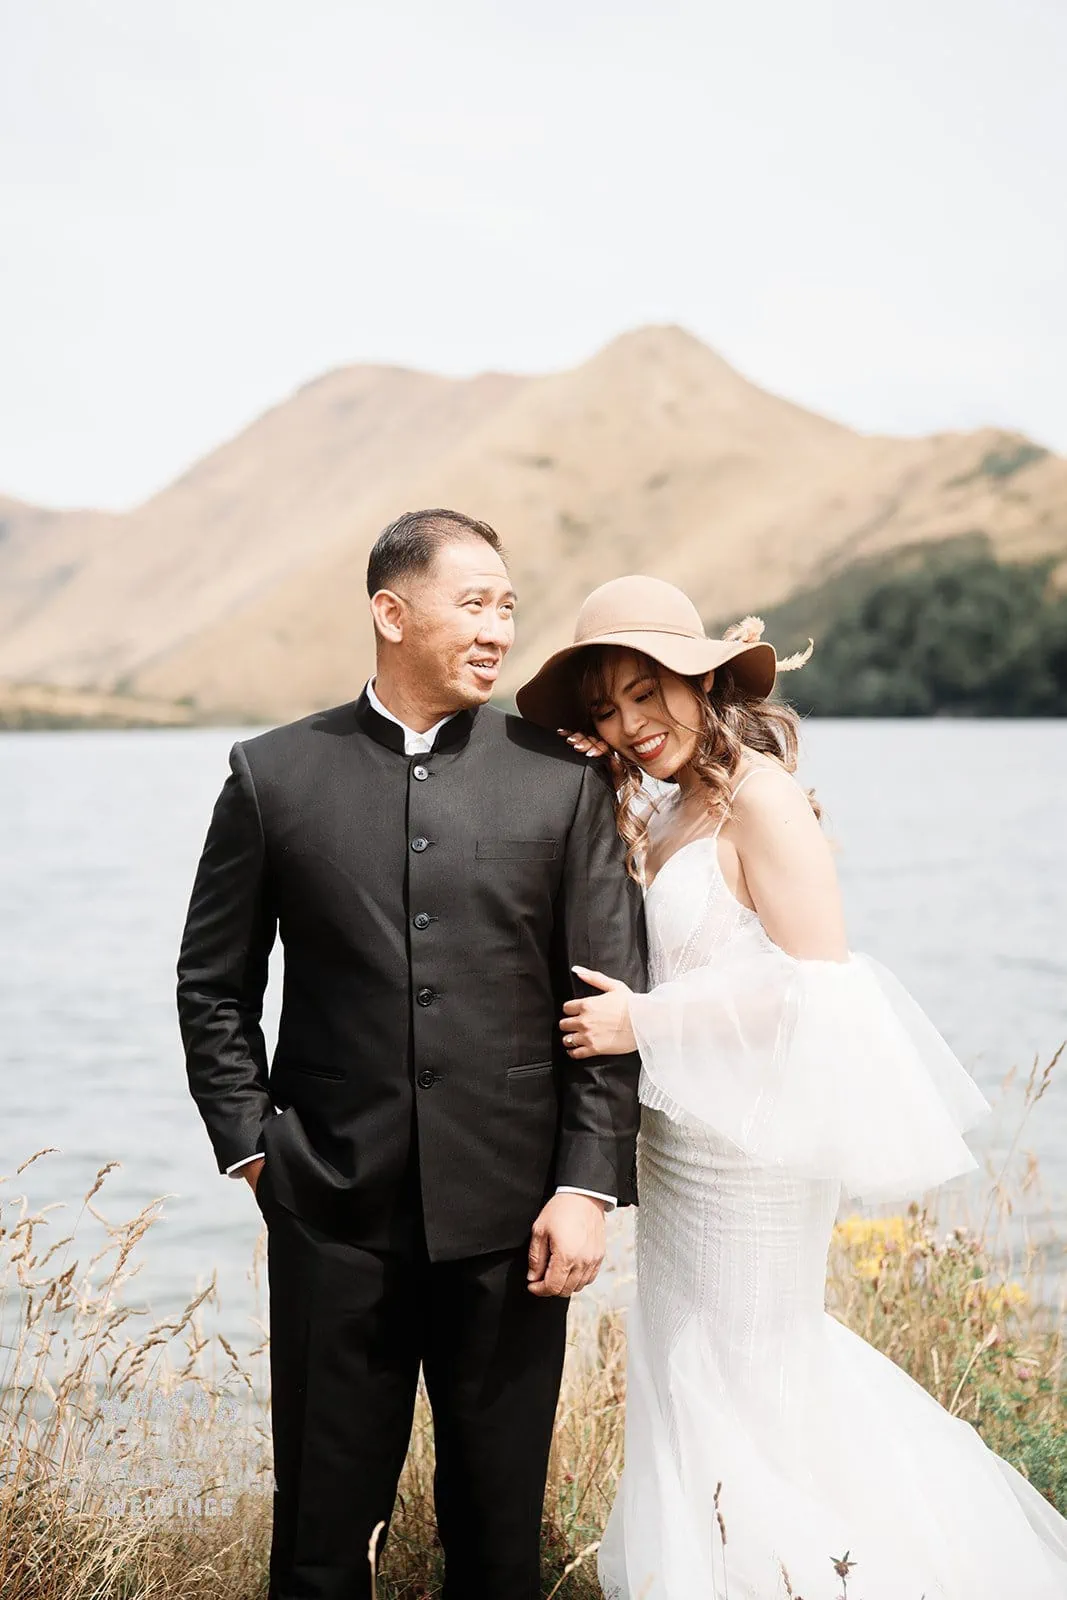 Nhi & Nicholas' Pre-Wedding Shoot in Queenstown with mountains and a lake in the background.